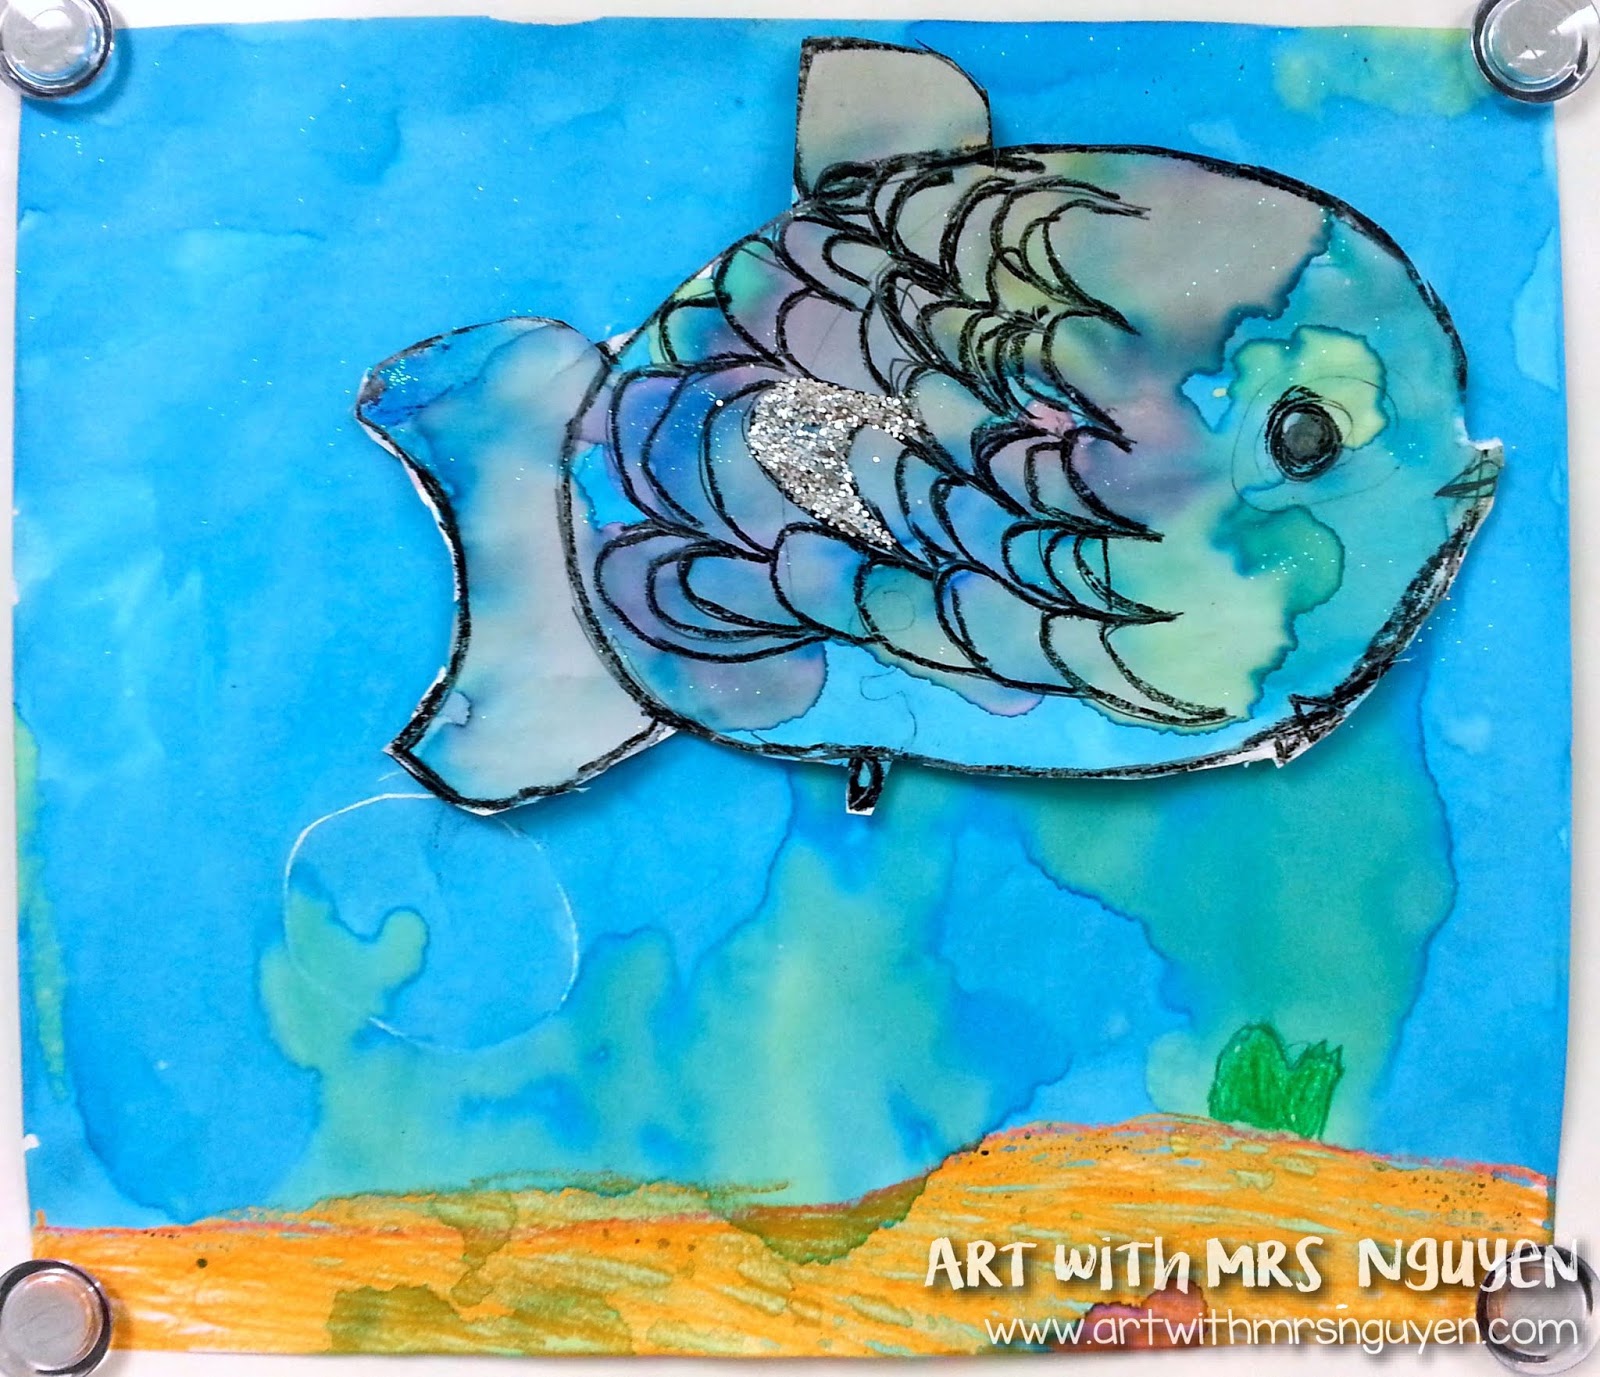 Sparkling Fish with Lisilinka Watercolors! Isn't this little guy